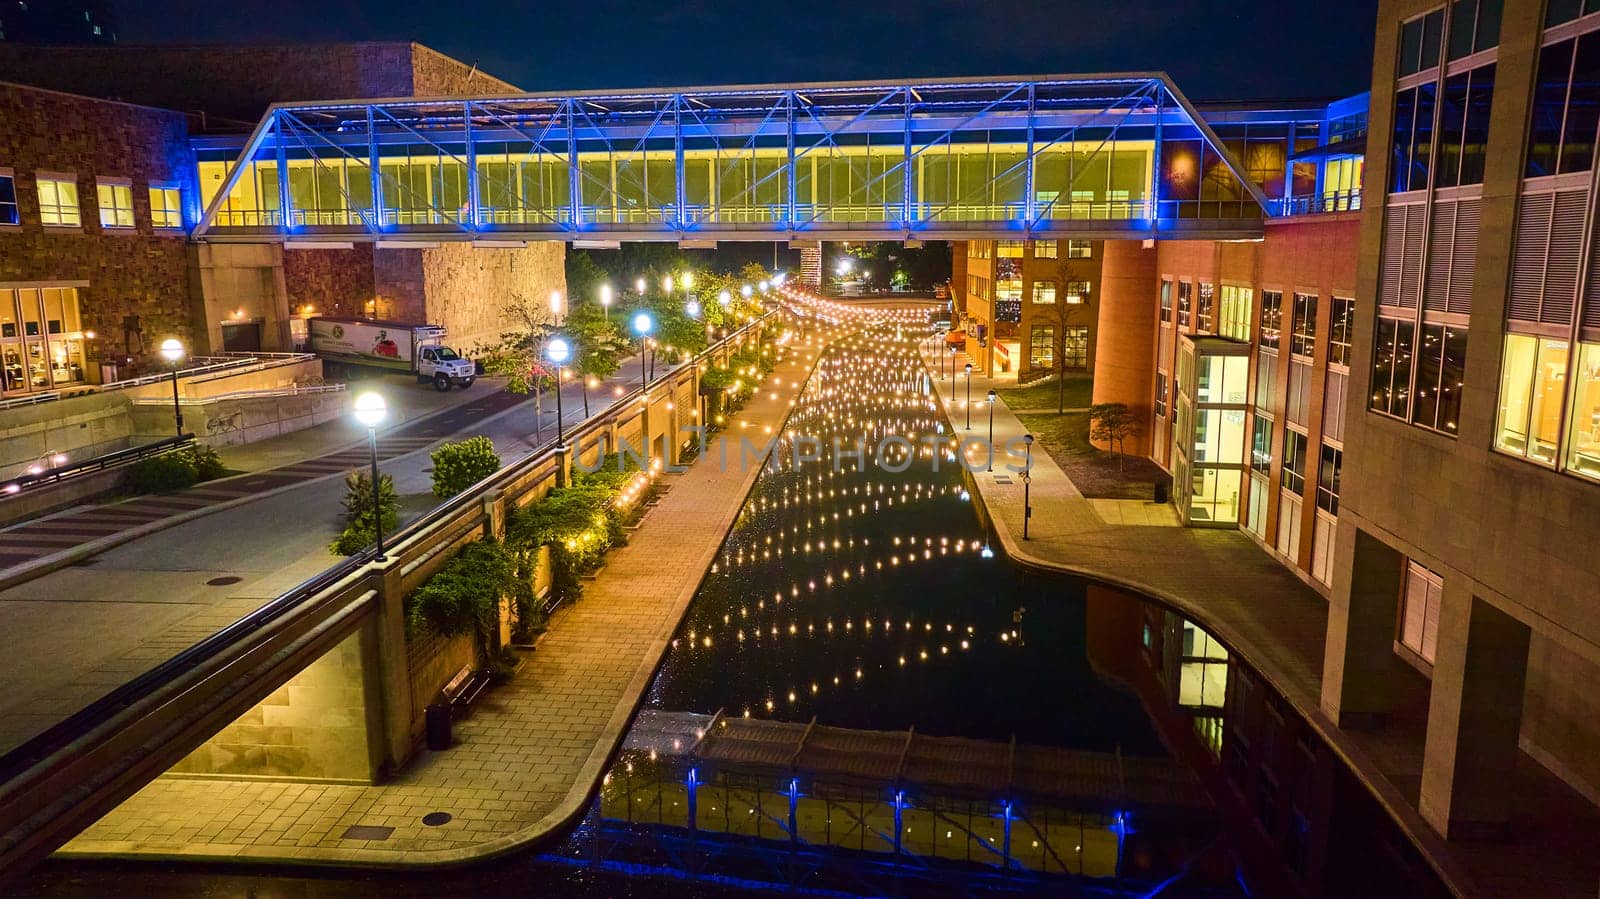 Nighttime aerial view of a vibrant Indianapolis cityscape, showcasing a lit pedestrian bridge crossing the canal, surrounded by modern architecture.